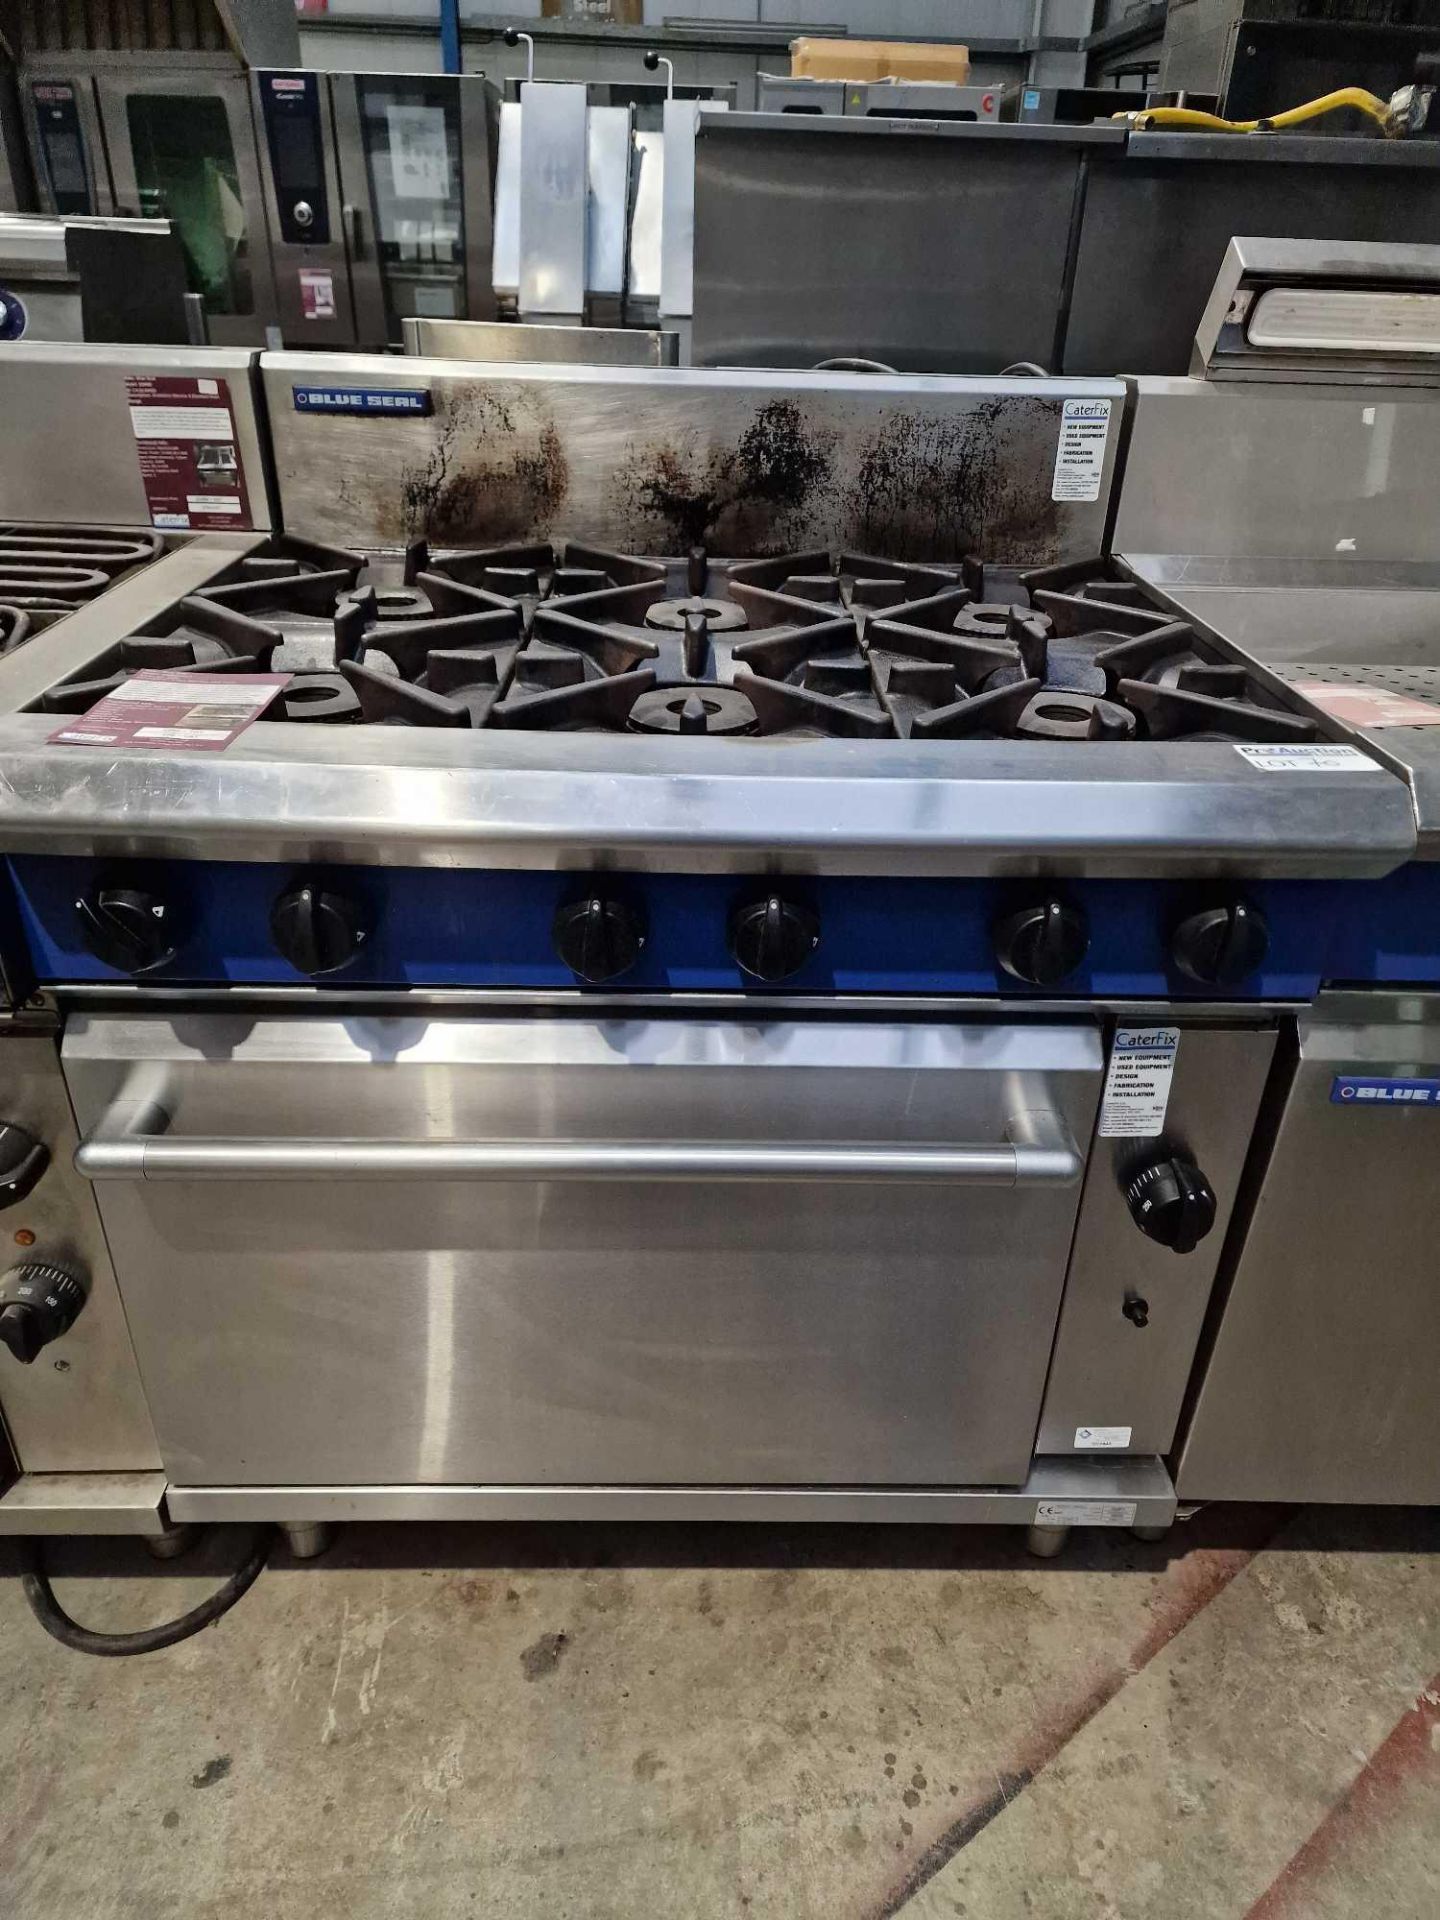 Blue Seal Stainless Steel 6 Gas Burners with oven - The heavy duty, stainless steel Blue Seal - Image 2 of 4